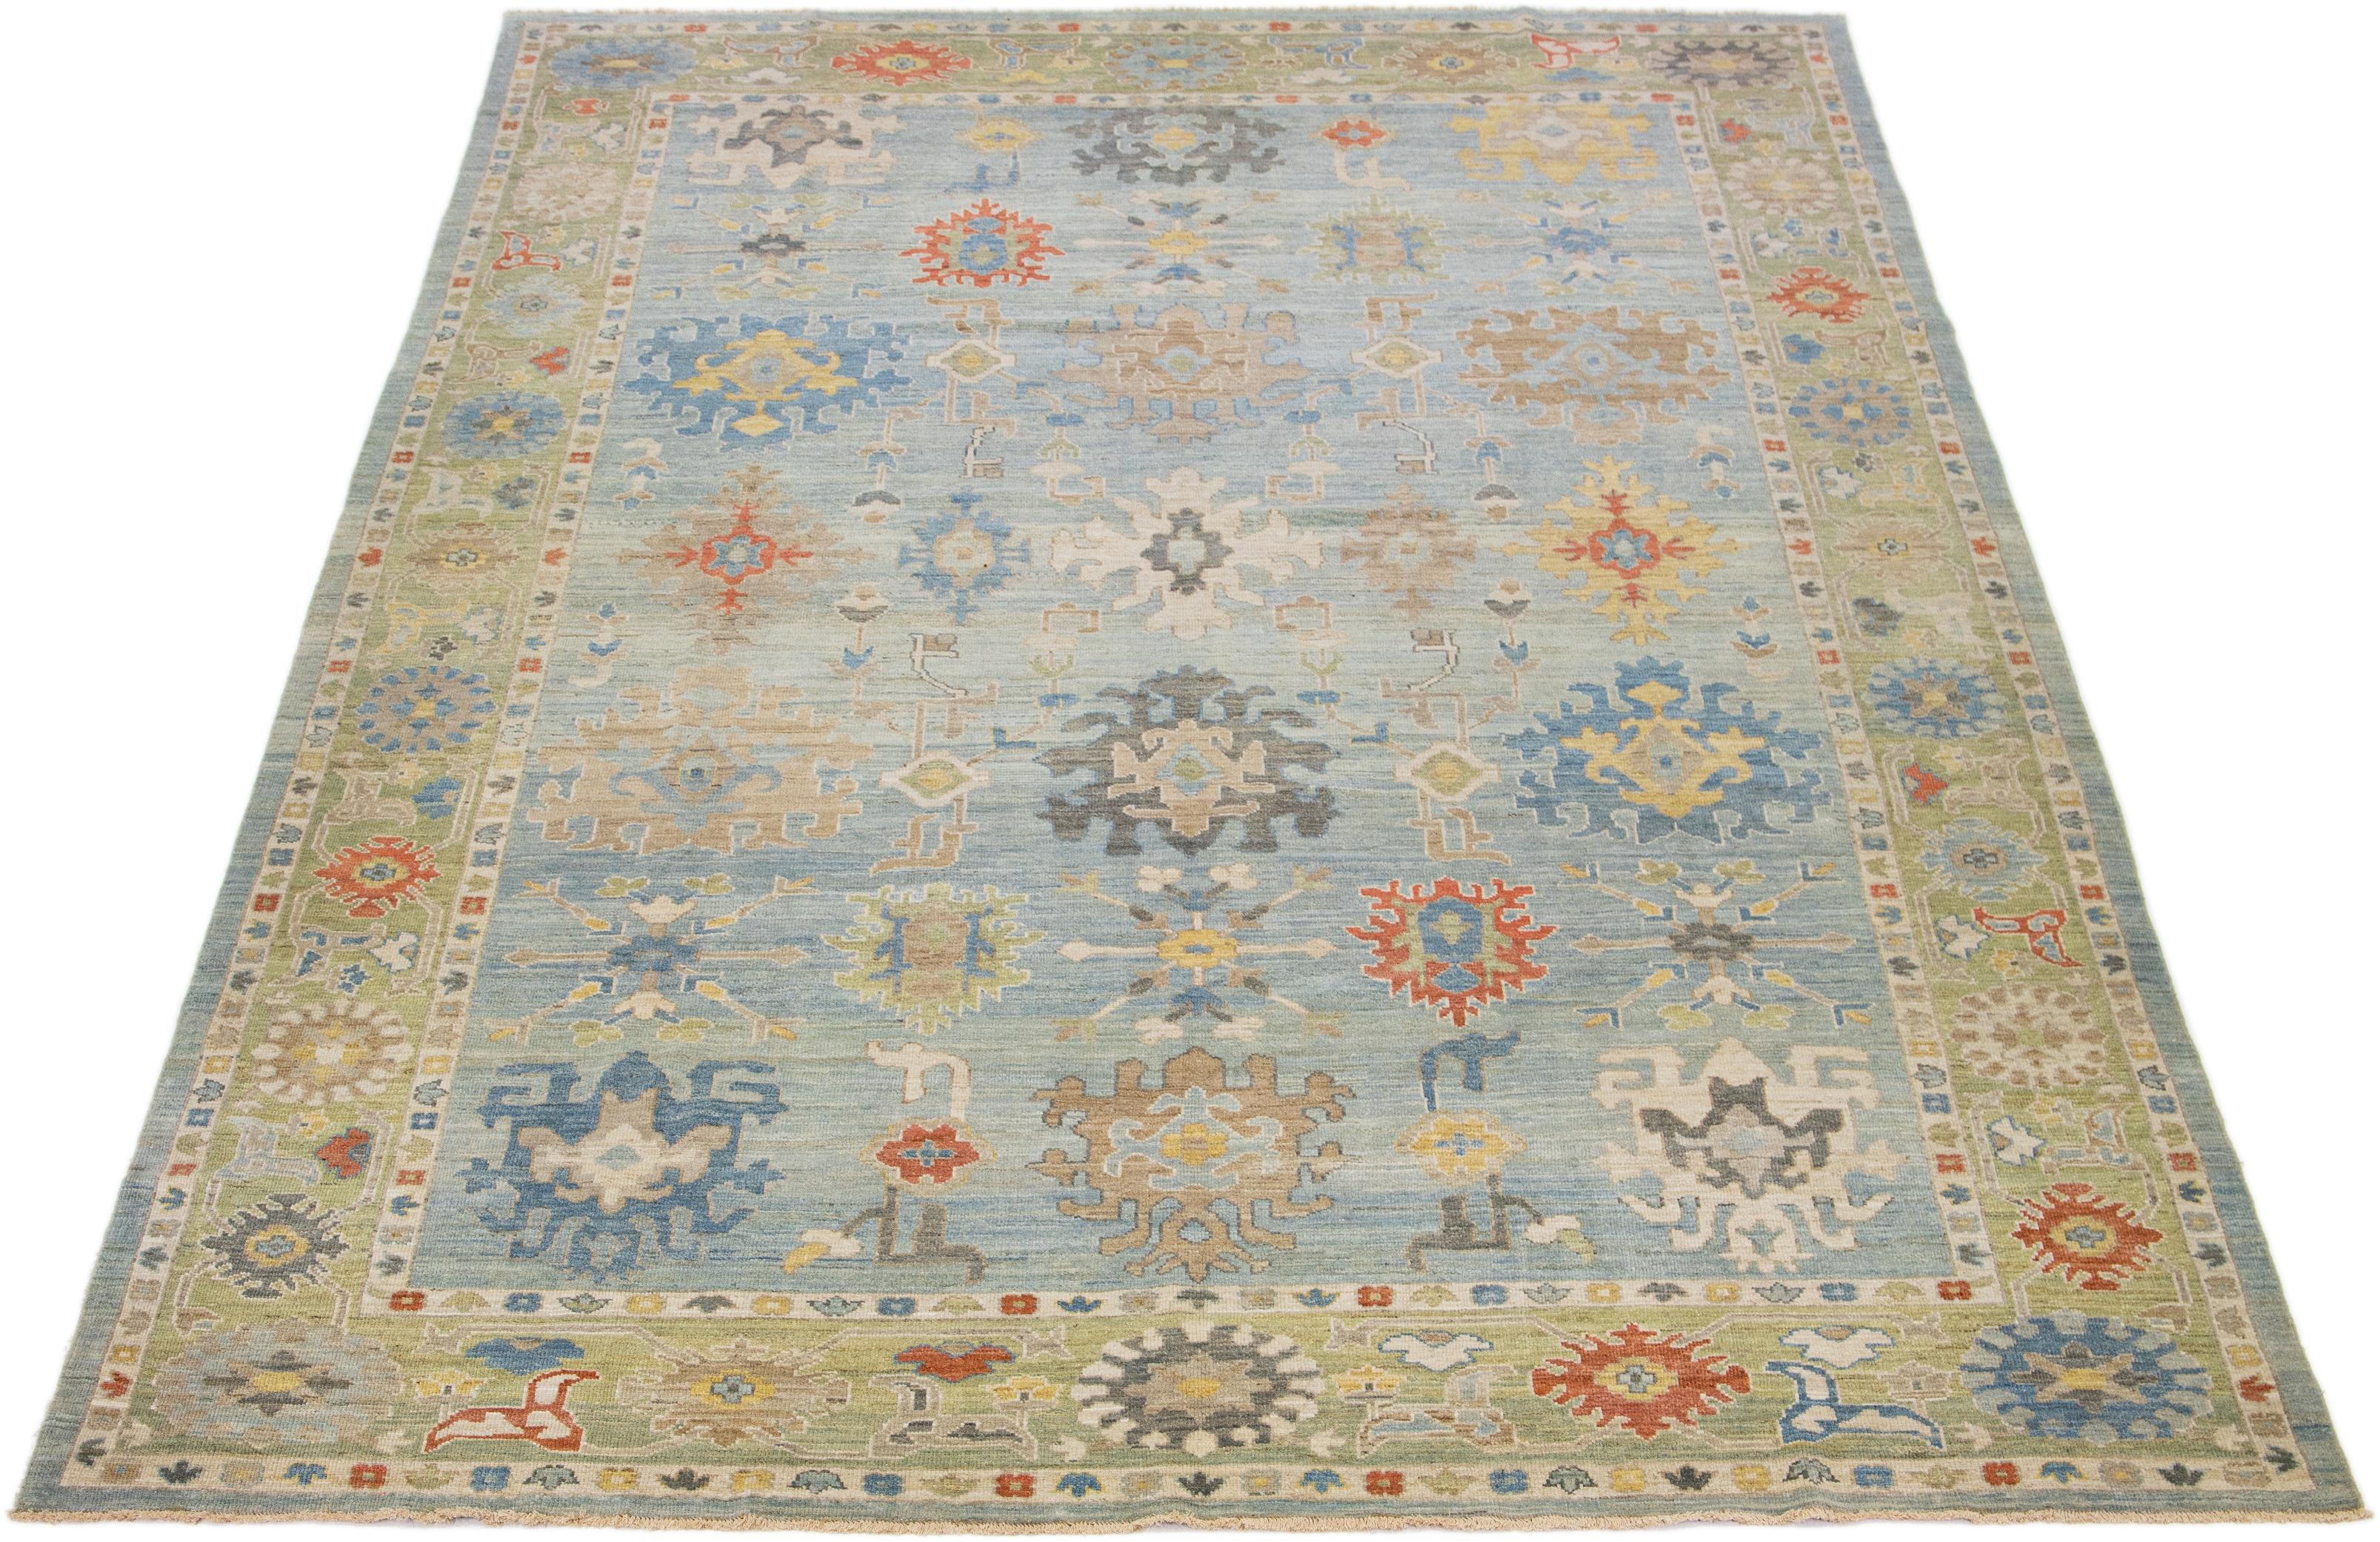 This modern reinterpretation of timeless Sultanabad design is beautifully manifested in an exquisitely hand-knotted wool rug, resplendent in its striking light blue shade. An intricate green border delineates its all-over floral embroidery,